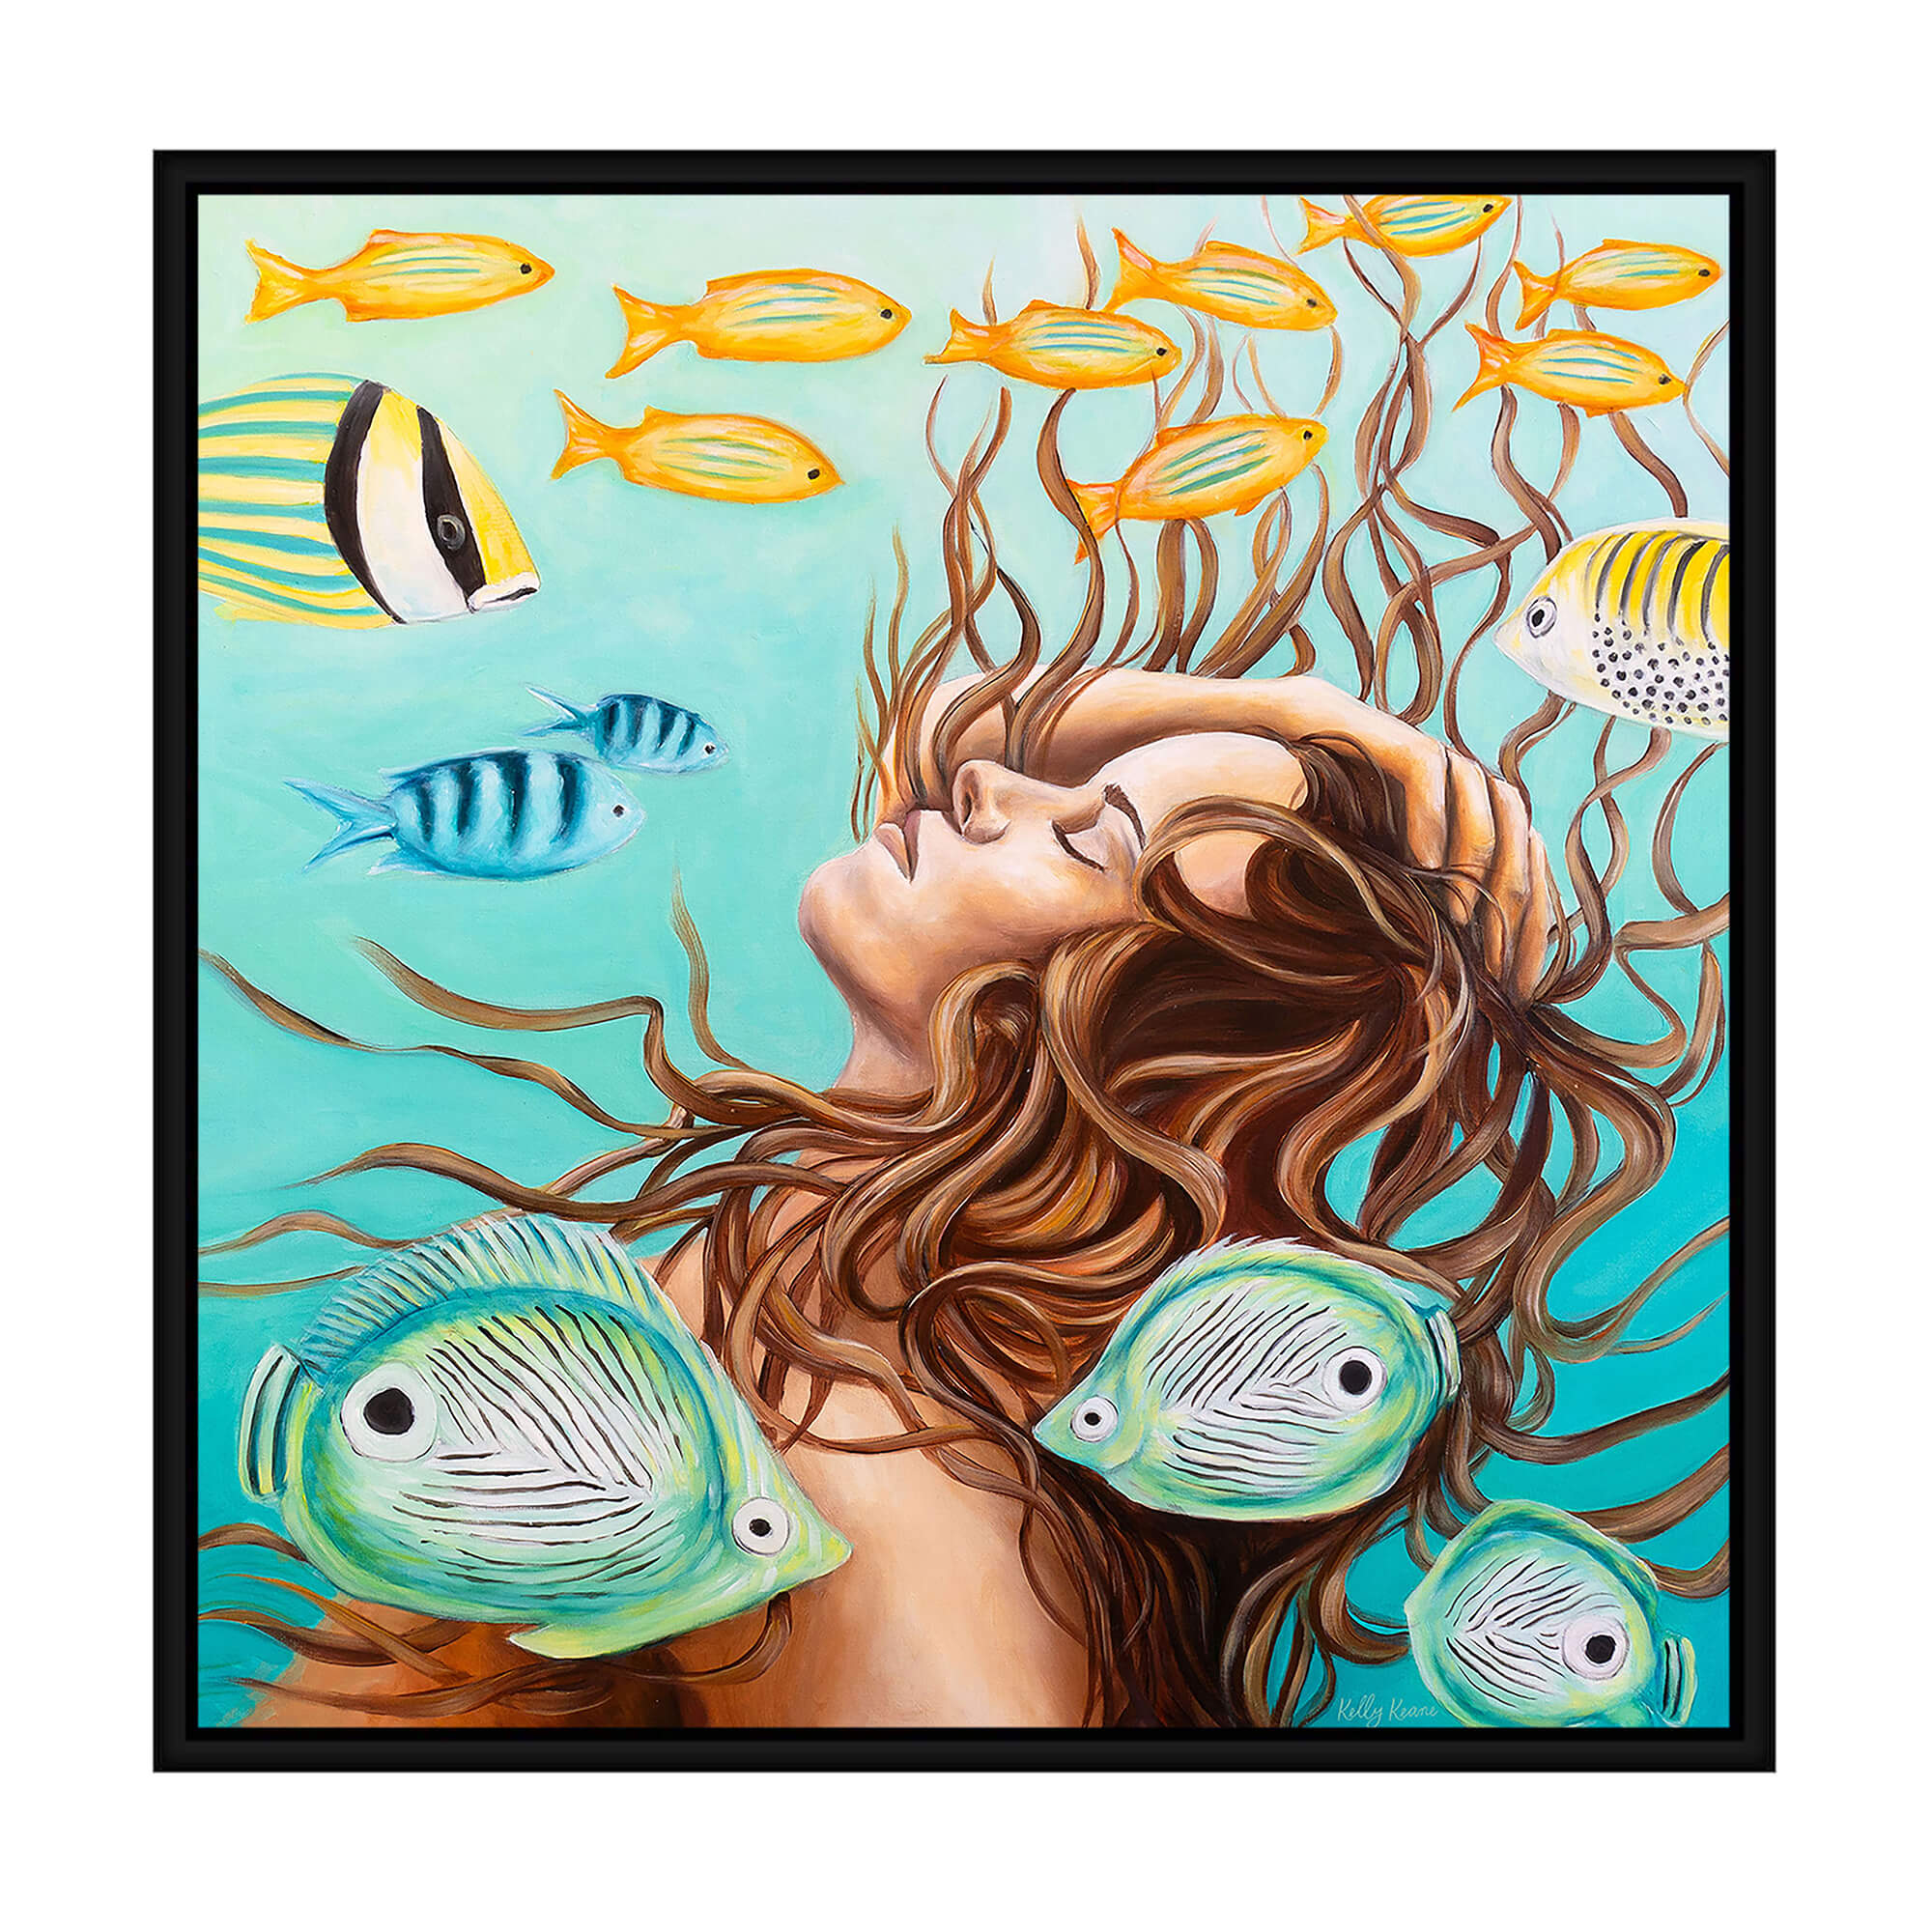 Canvas art print featuring a woman relaxing underwater by Hawaii artist Kelly Keane